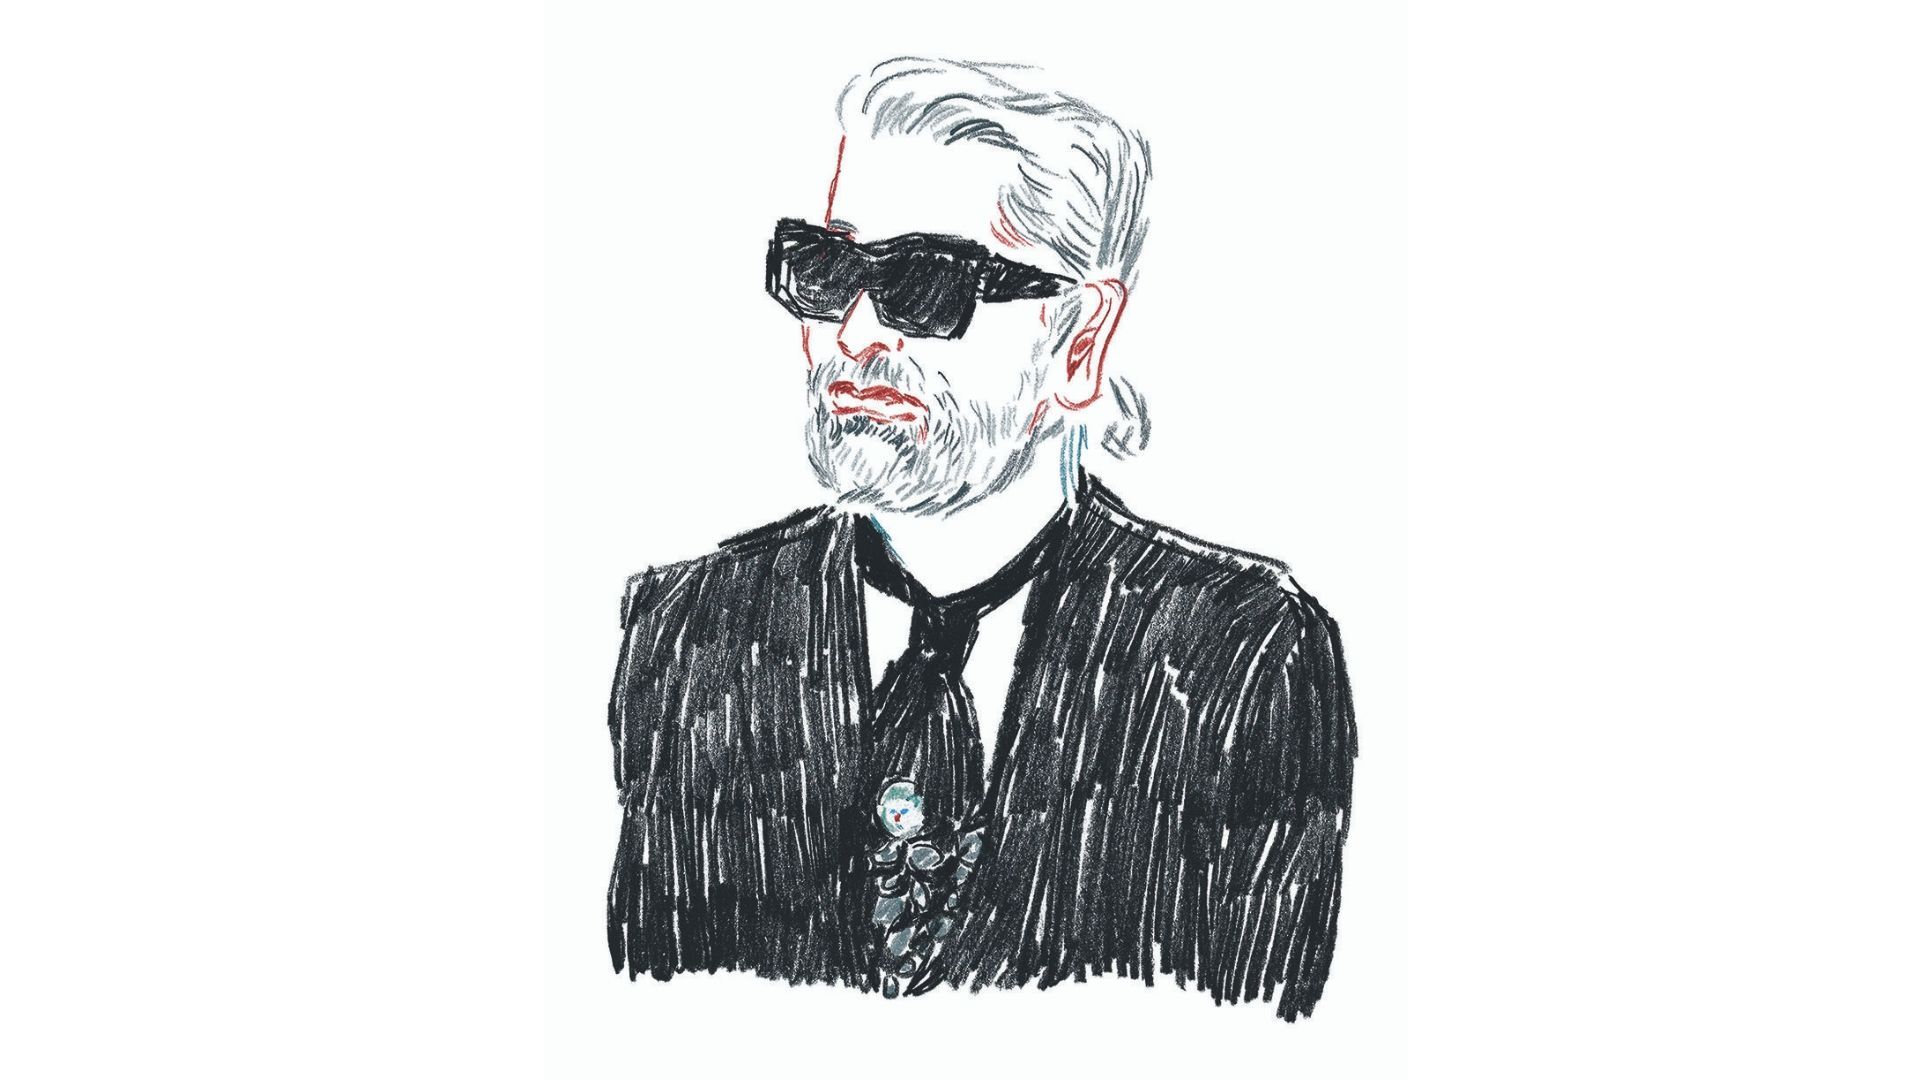 A New Illustrated Chanel Book Pays Homage To The Late Karl